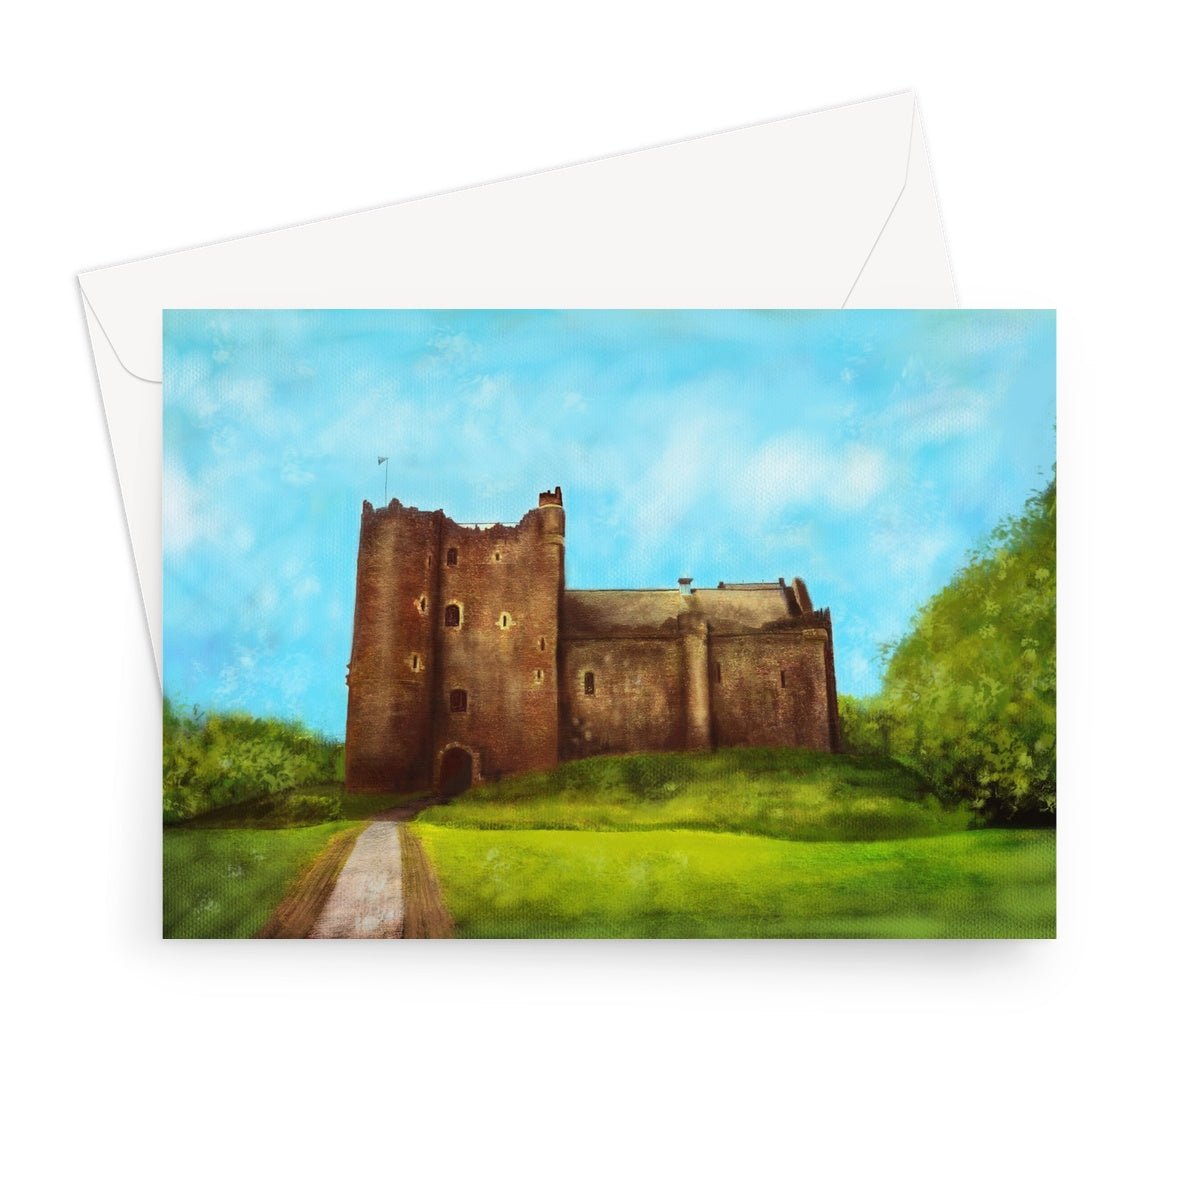 Doune Castle Art Gifts Greeting Card-Greetings Cards-Historic & Iconic Scotland Art Gallery-7"x5"-10 Cards-Paintings, Prints, Homeware, Art Gifts From Scotland By Scottish Artist Kevin Hunter